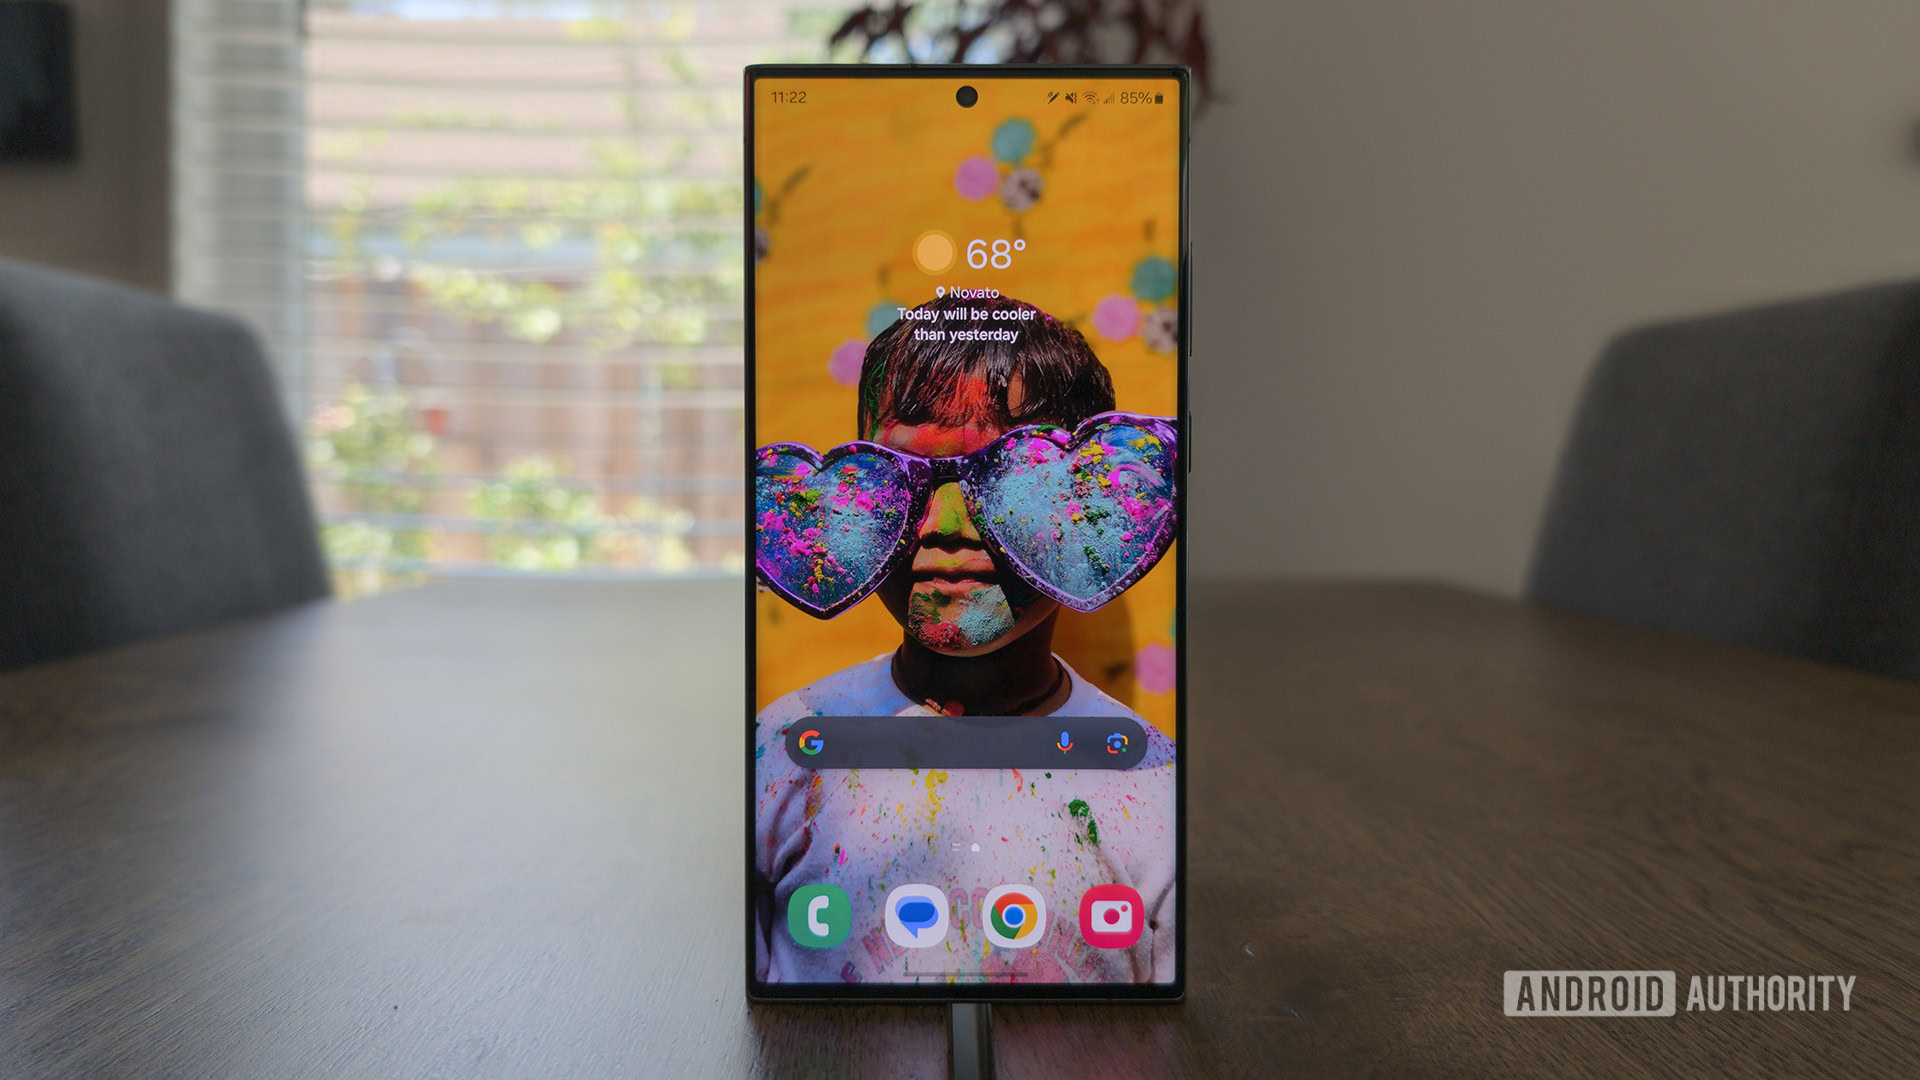 Wallpaper Wednesday: More great phone wallpapers for all to share (May 29)